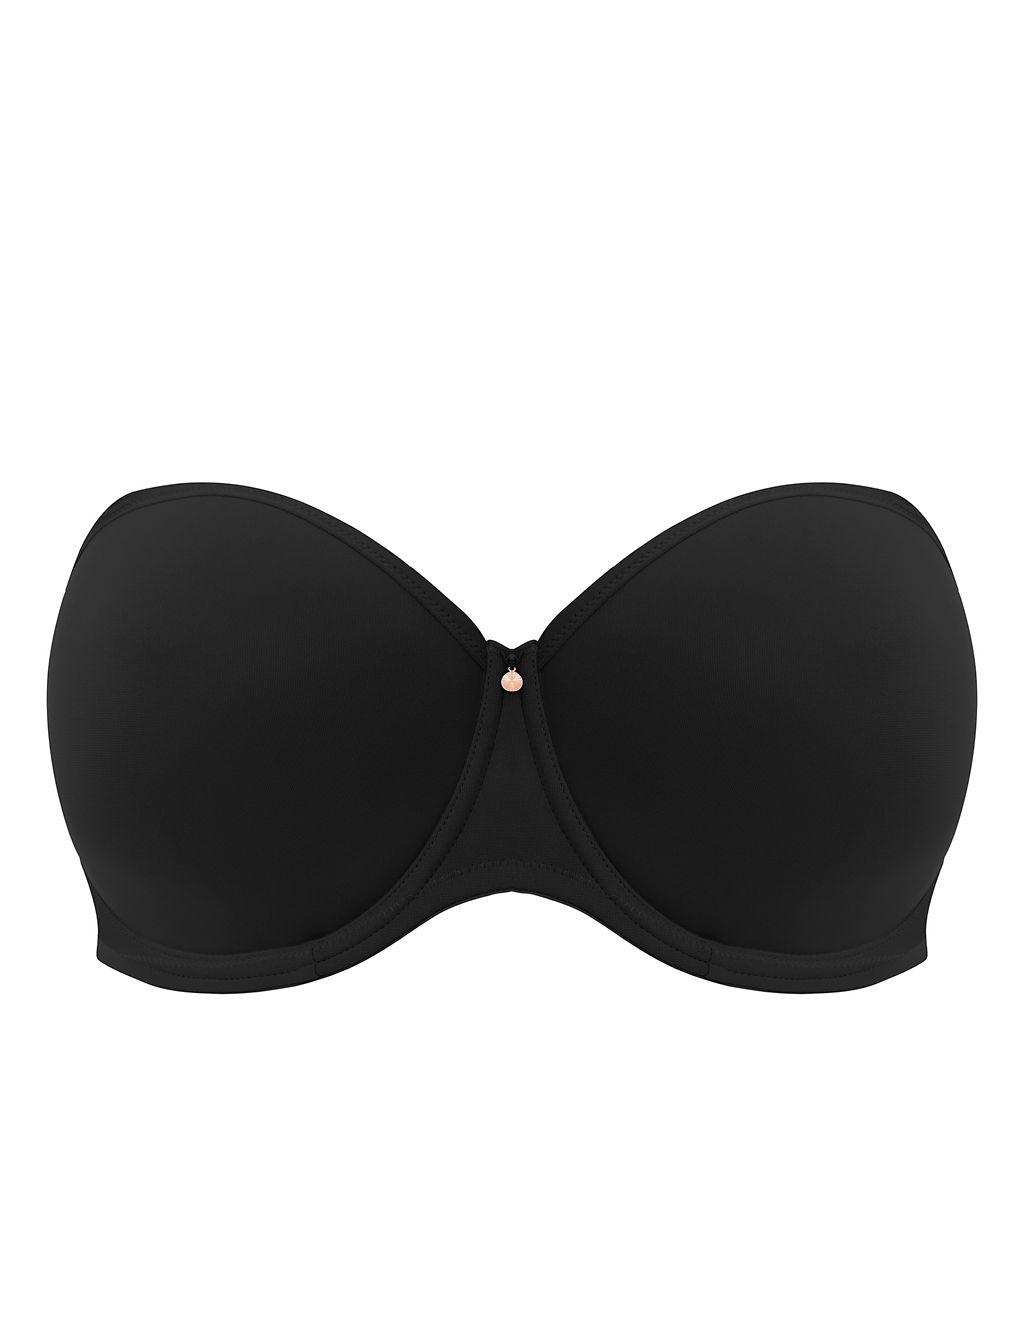 Smooth Wired Moulded Strapless Bra DD-J 1 of 7